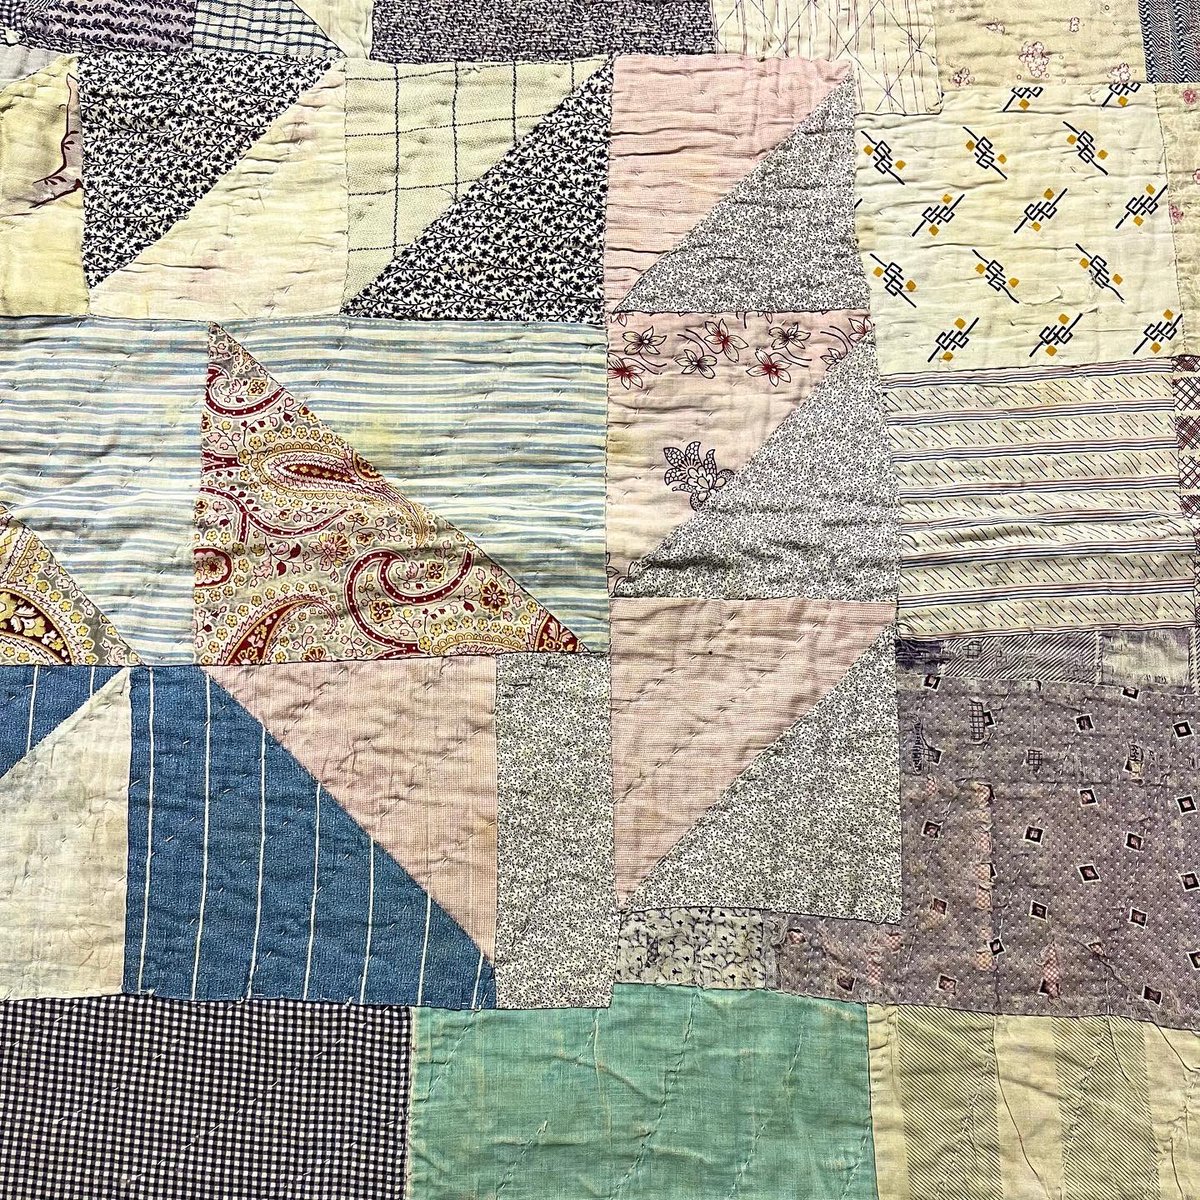 For International Women’s Day, we are highlighting this spectacular patchwork quilt. See this beautiful piece on display in our current exhibition; Fashioning Our World, open until 12 May. Details here: salisburymuseum.org.uk/whats-on/fashi…